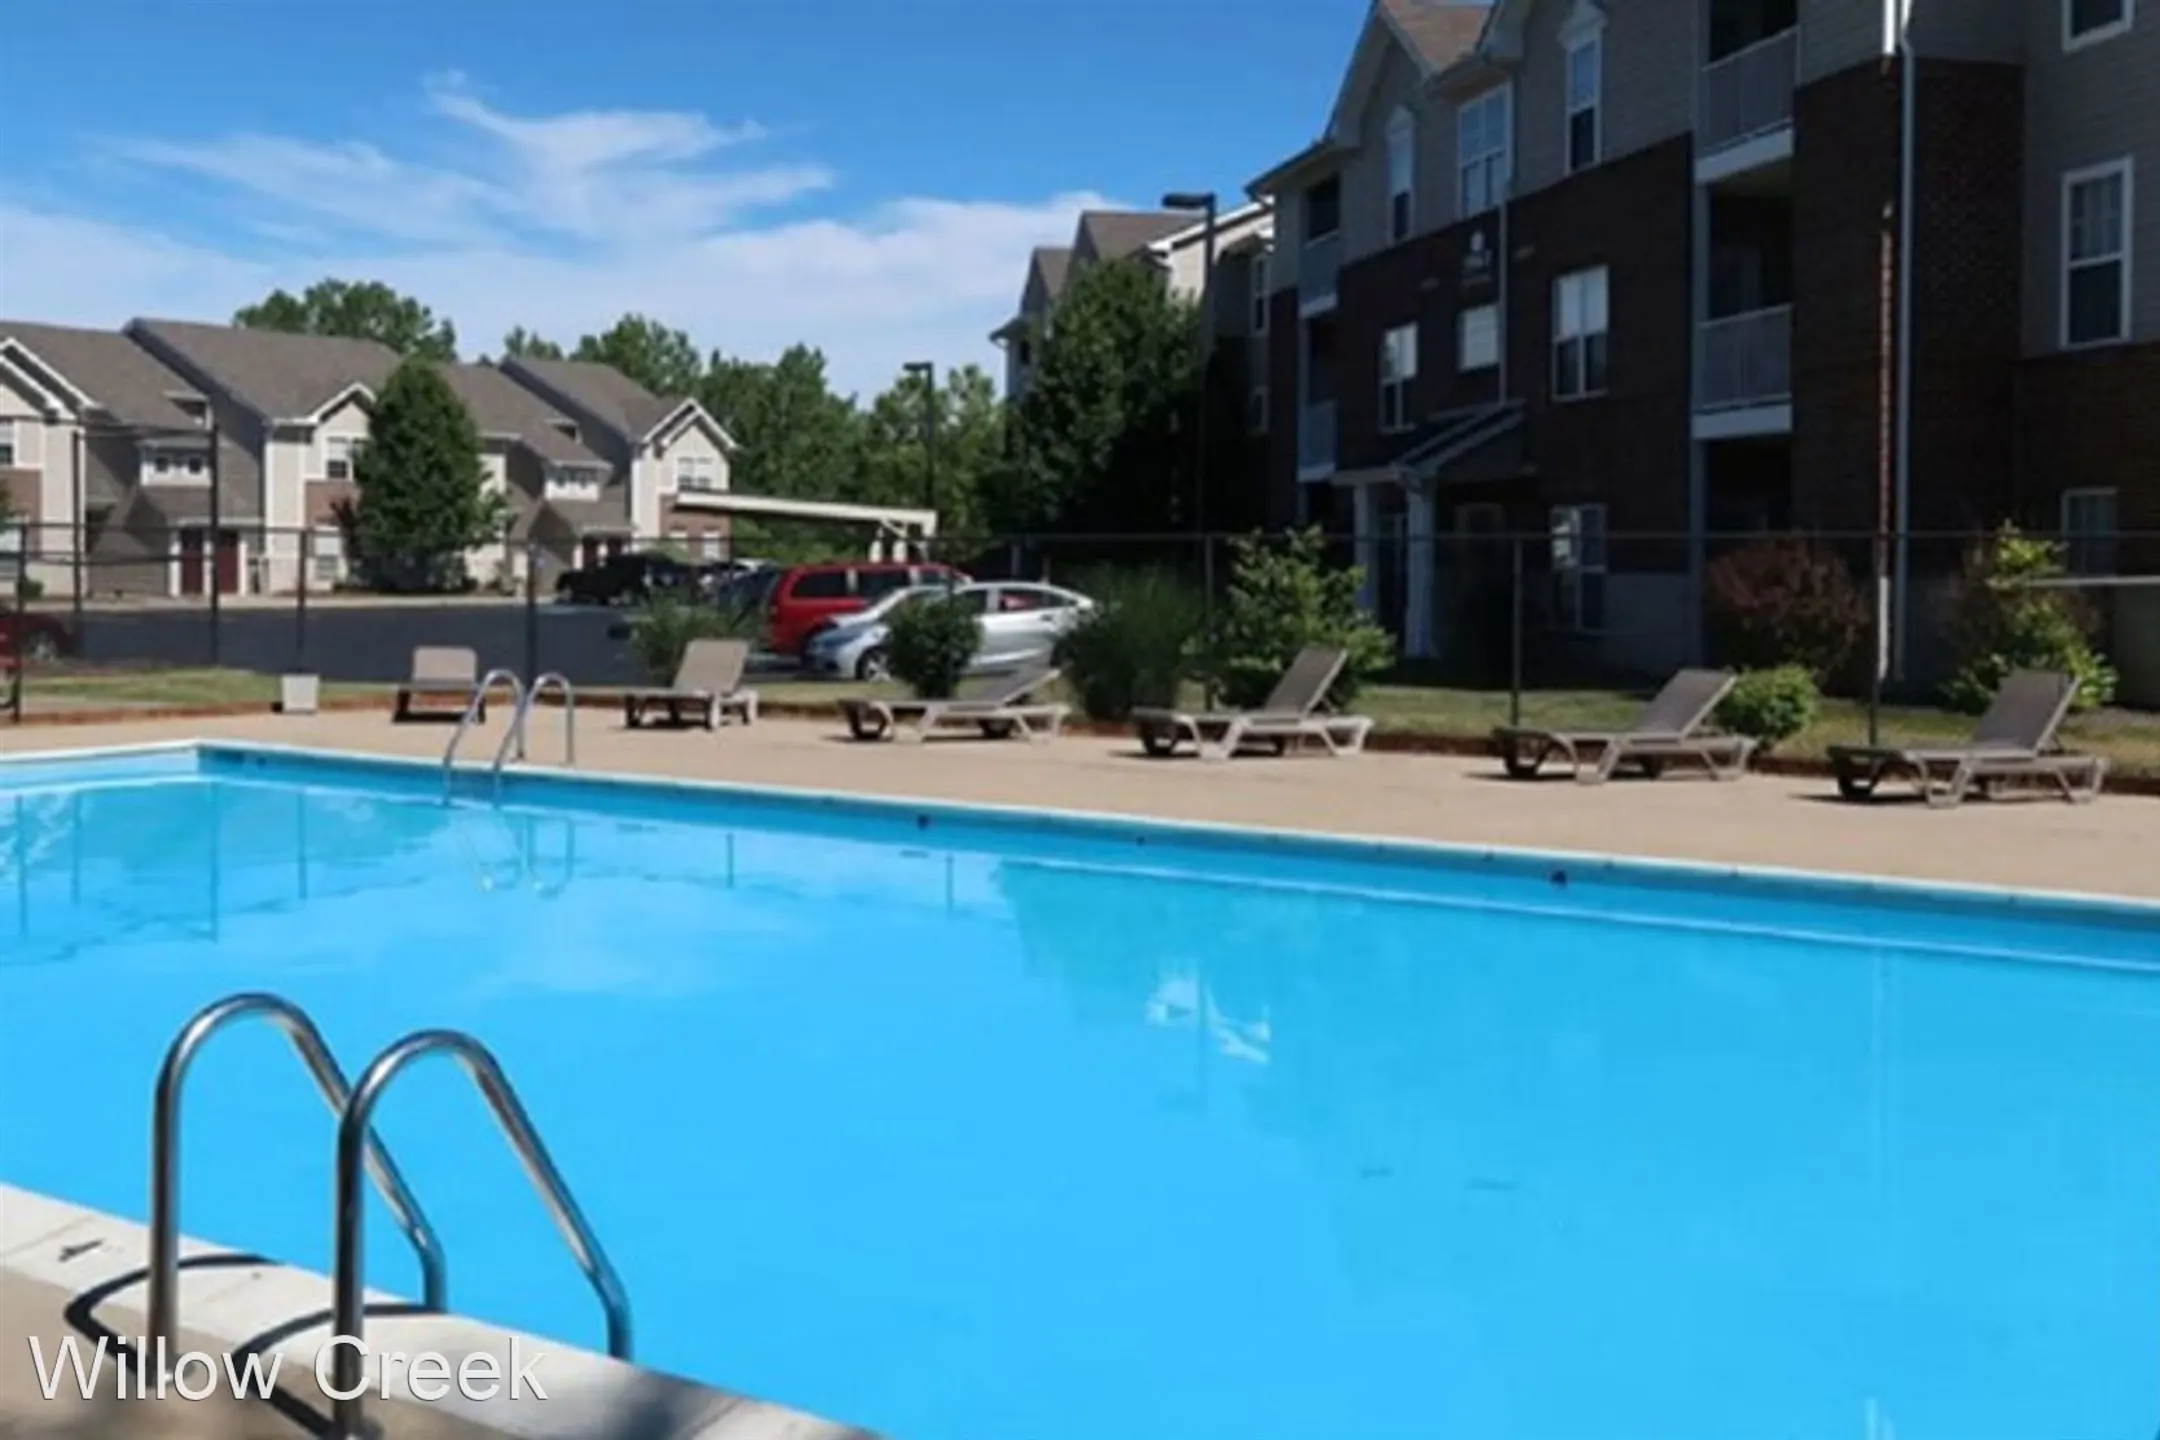 Pool - Willow Creek Apartments - Portage, IN